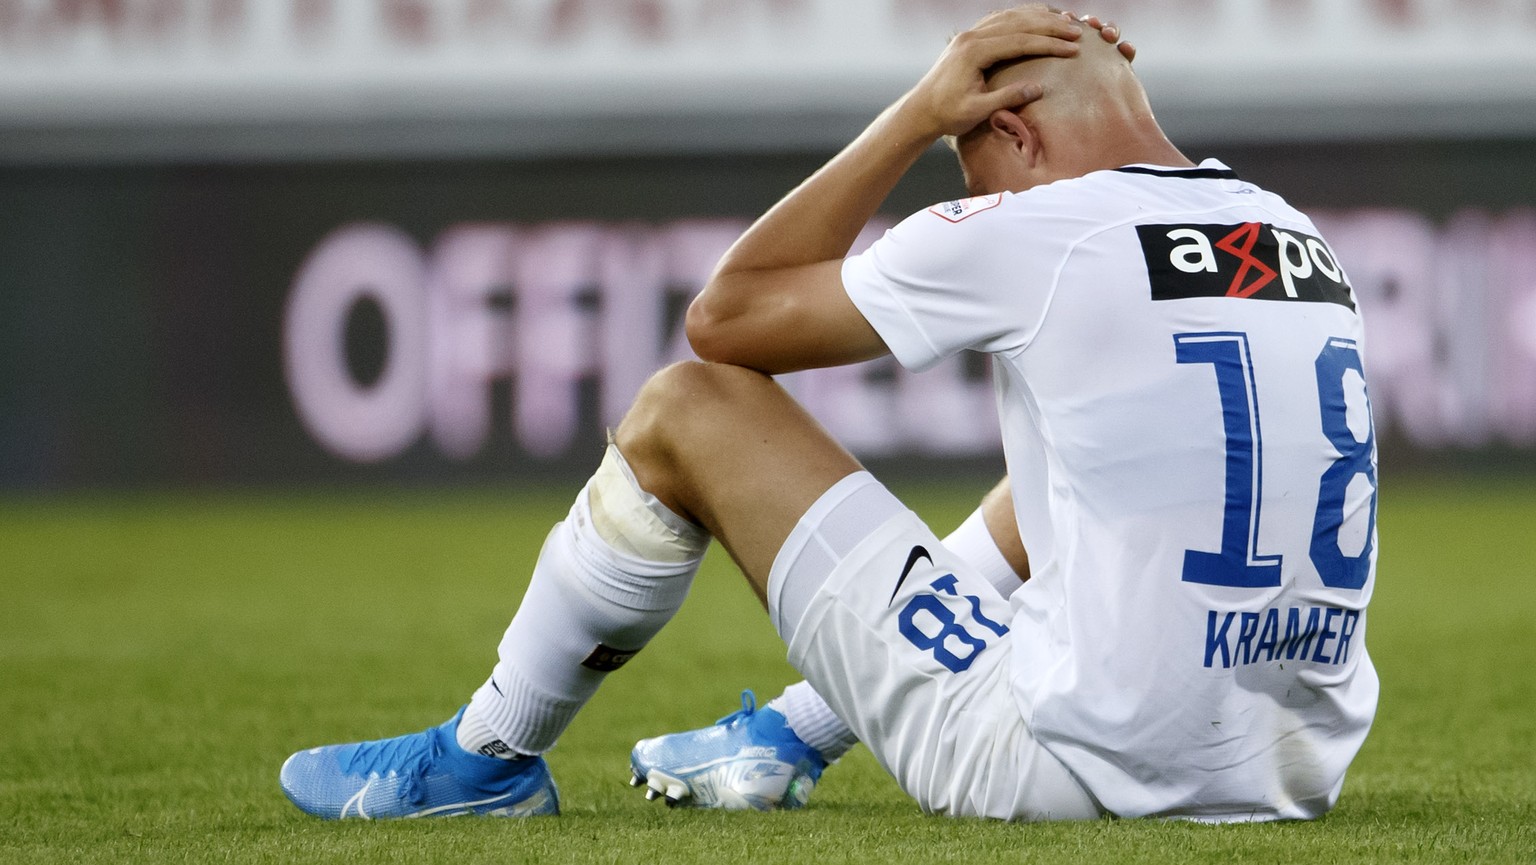 Zurich&#039;s forward Blaz Kramer react after losing against Sion, during the Super League soccer match of Swiss Championship between FC Sion and FC Zuerich, at the Stade de Tourbillon stadium, in Sio ...